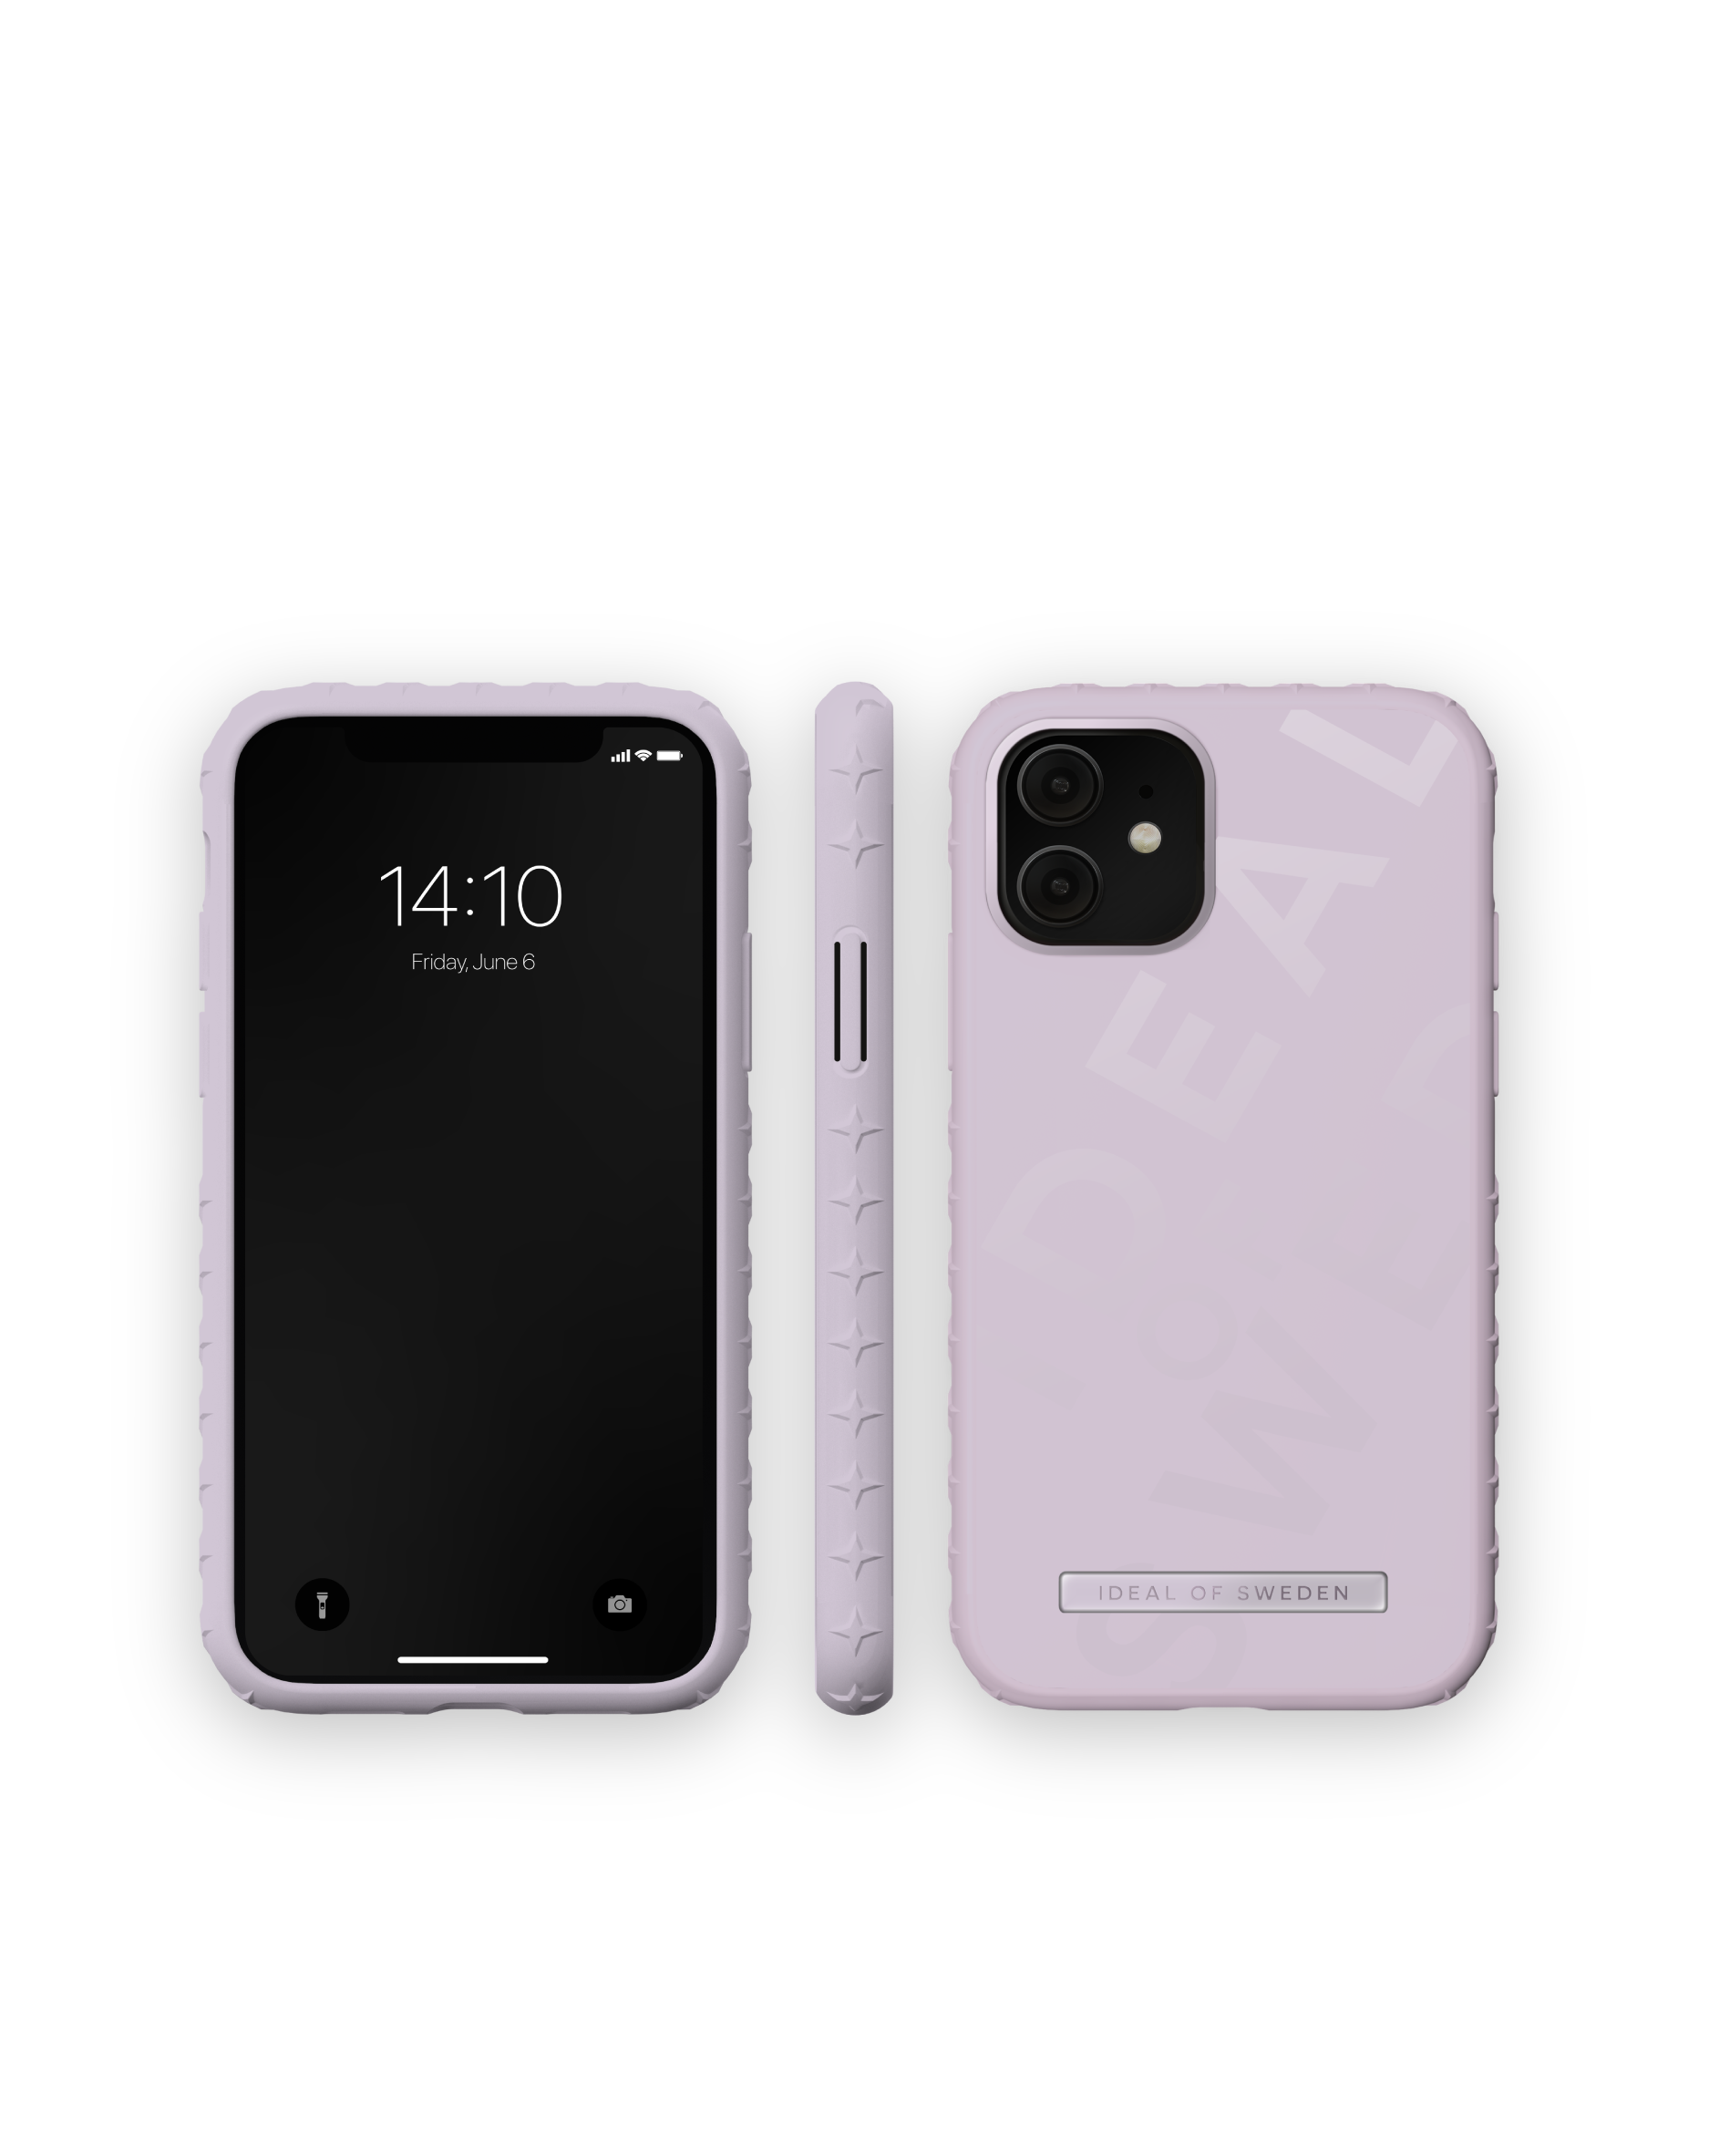 Apple, 11 SWEDEN iPhone IDACAS22-I1961-382, / Lavender OF Force IDEAL iPhone XR, Backcover,